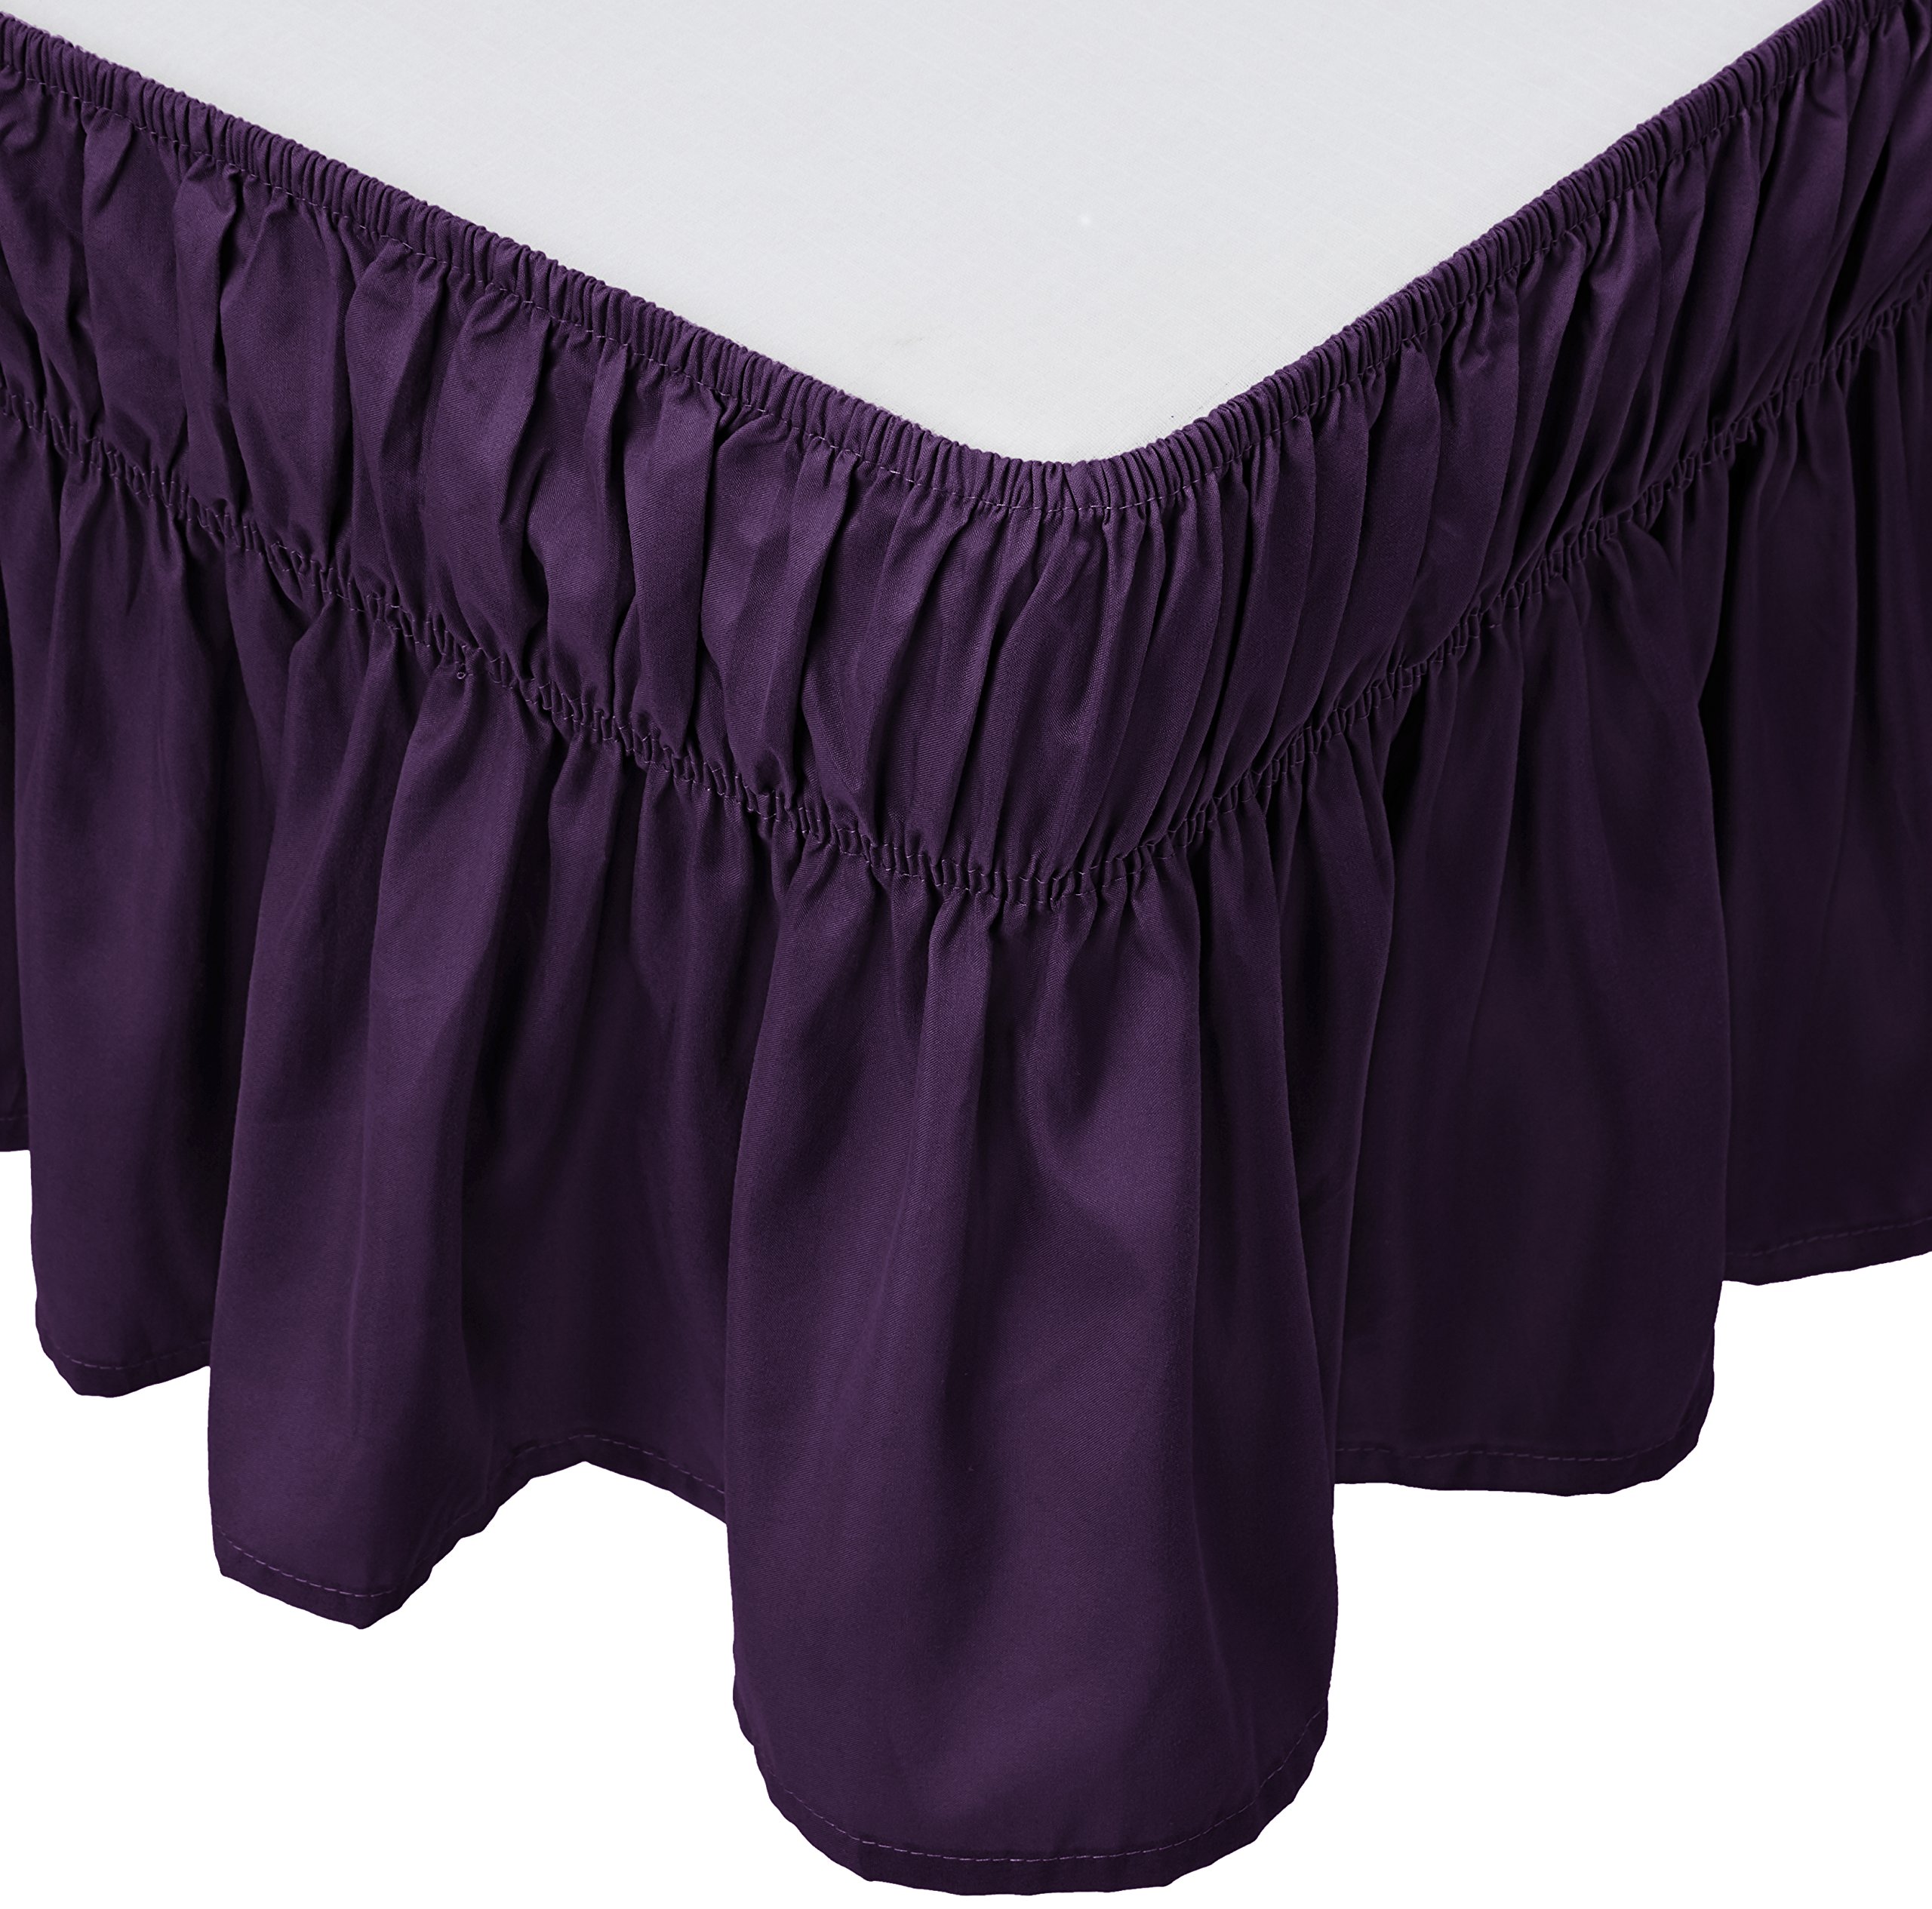 Book Cover Mk Collection Wrap Around Style Easy Fit Elastic Bed Ruffles Bed-Skirt Queen-King Solid Dark Purple New Queen-King Dark Purple